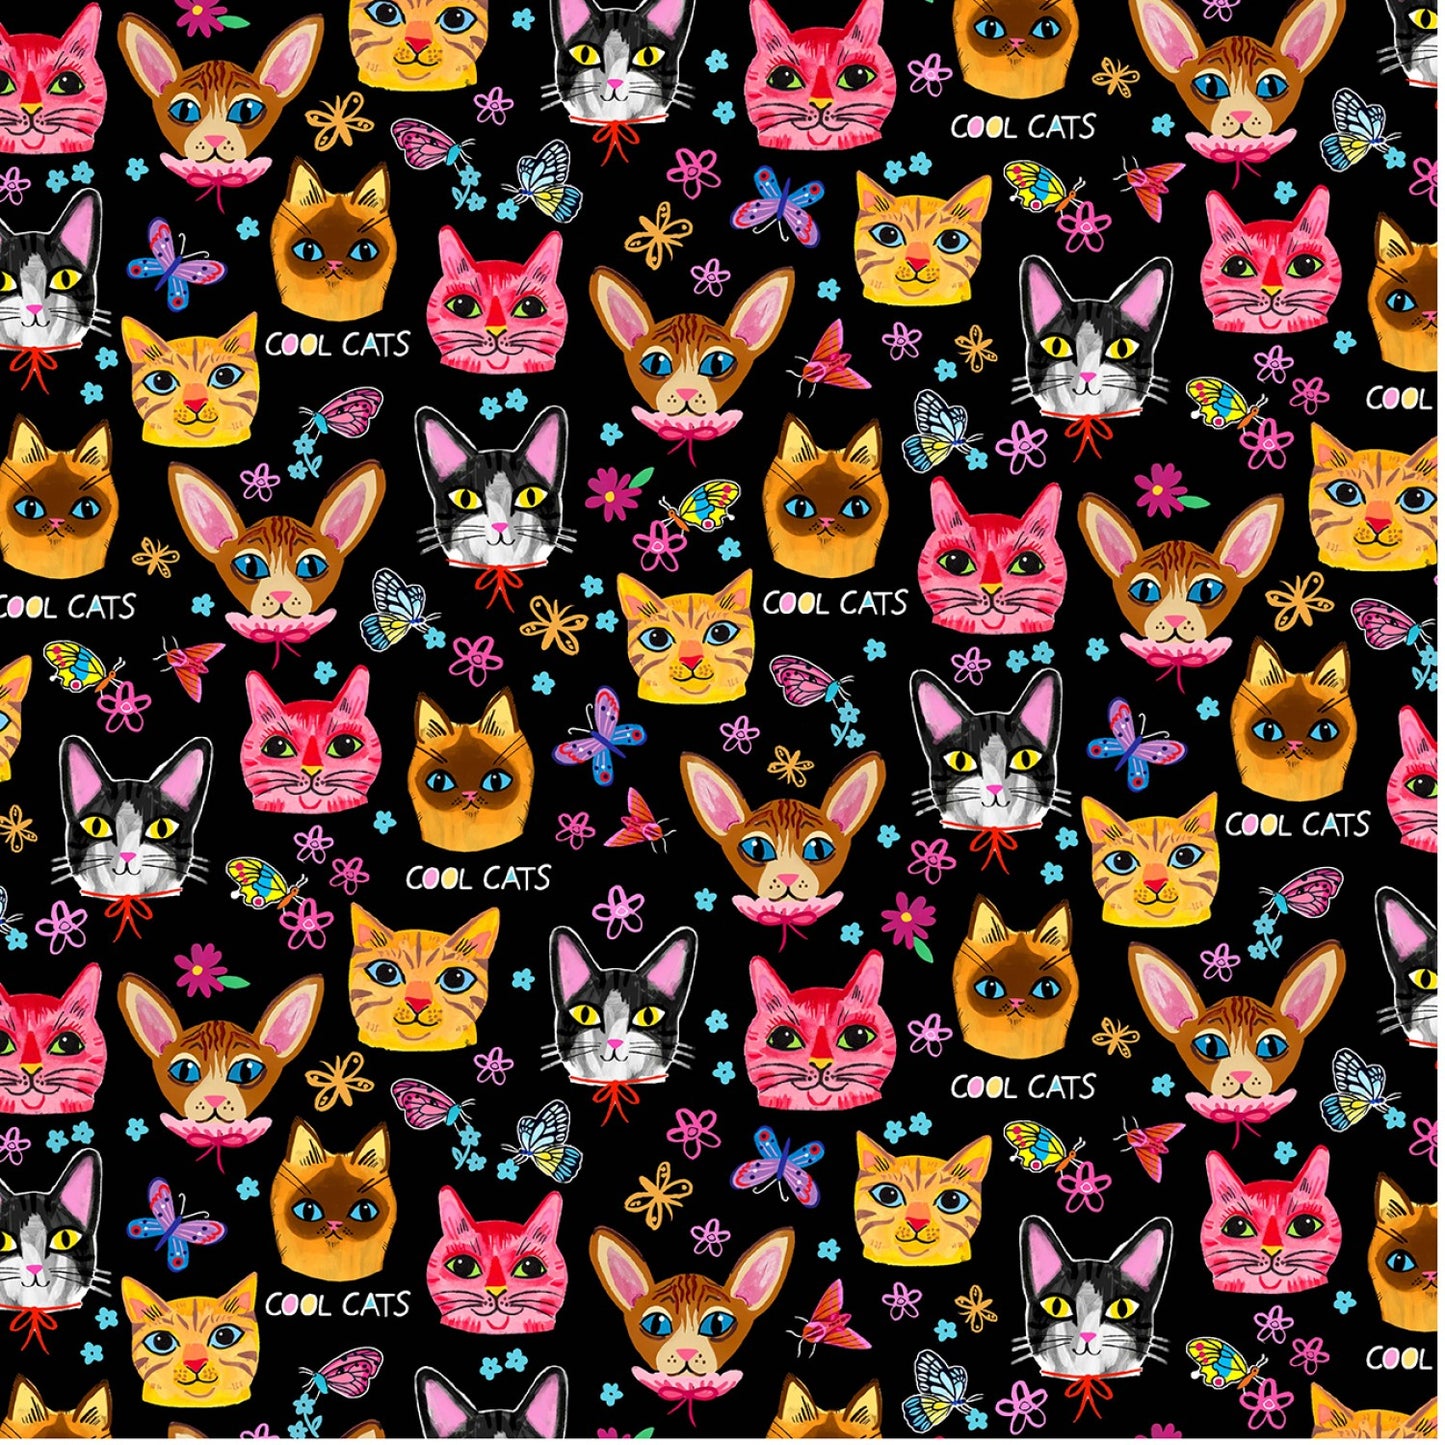 Puddy Cats by Emma Jayne Crazy Cats Black    DDC10614-BLAC Cotton Woven Fabric